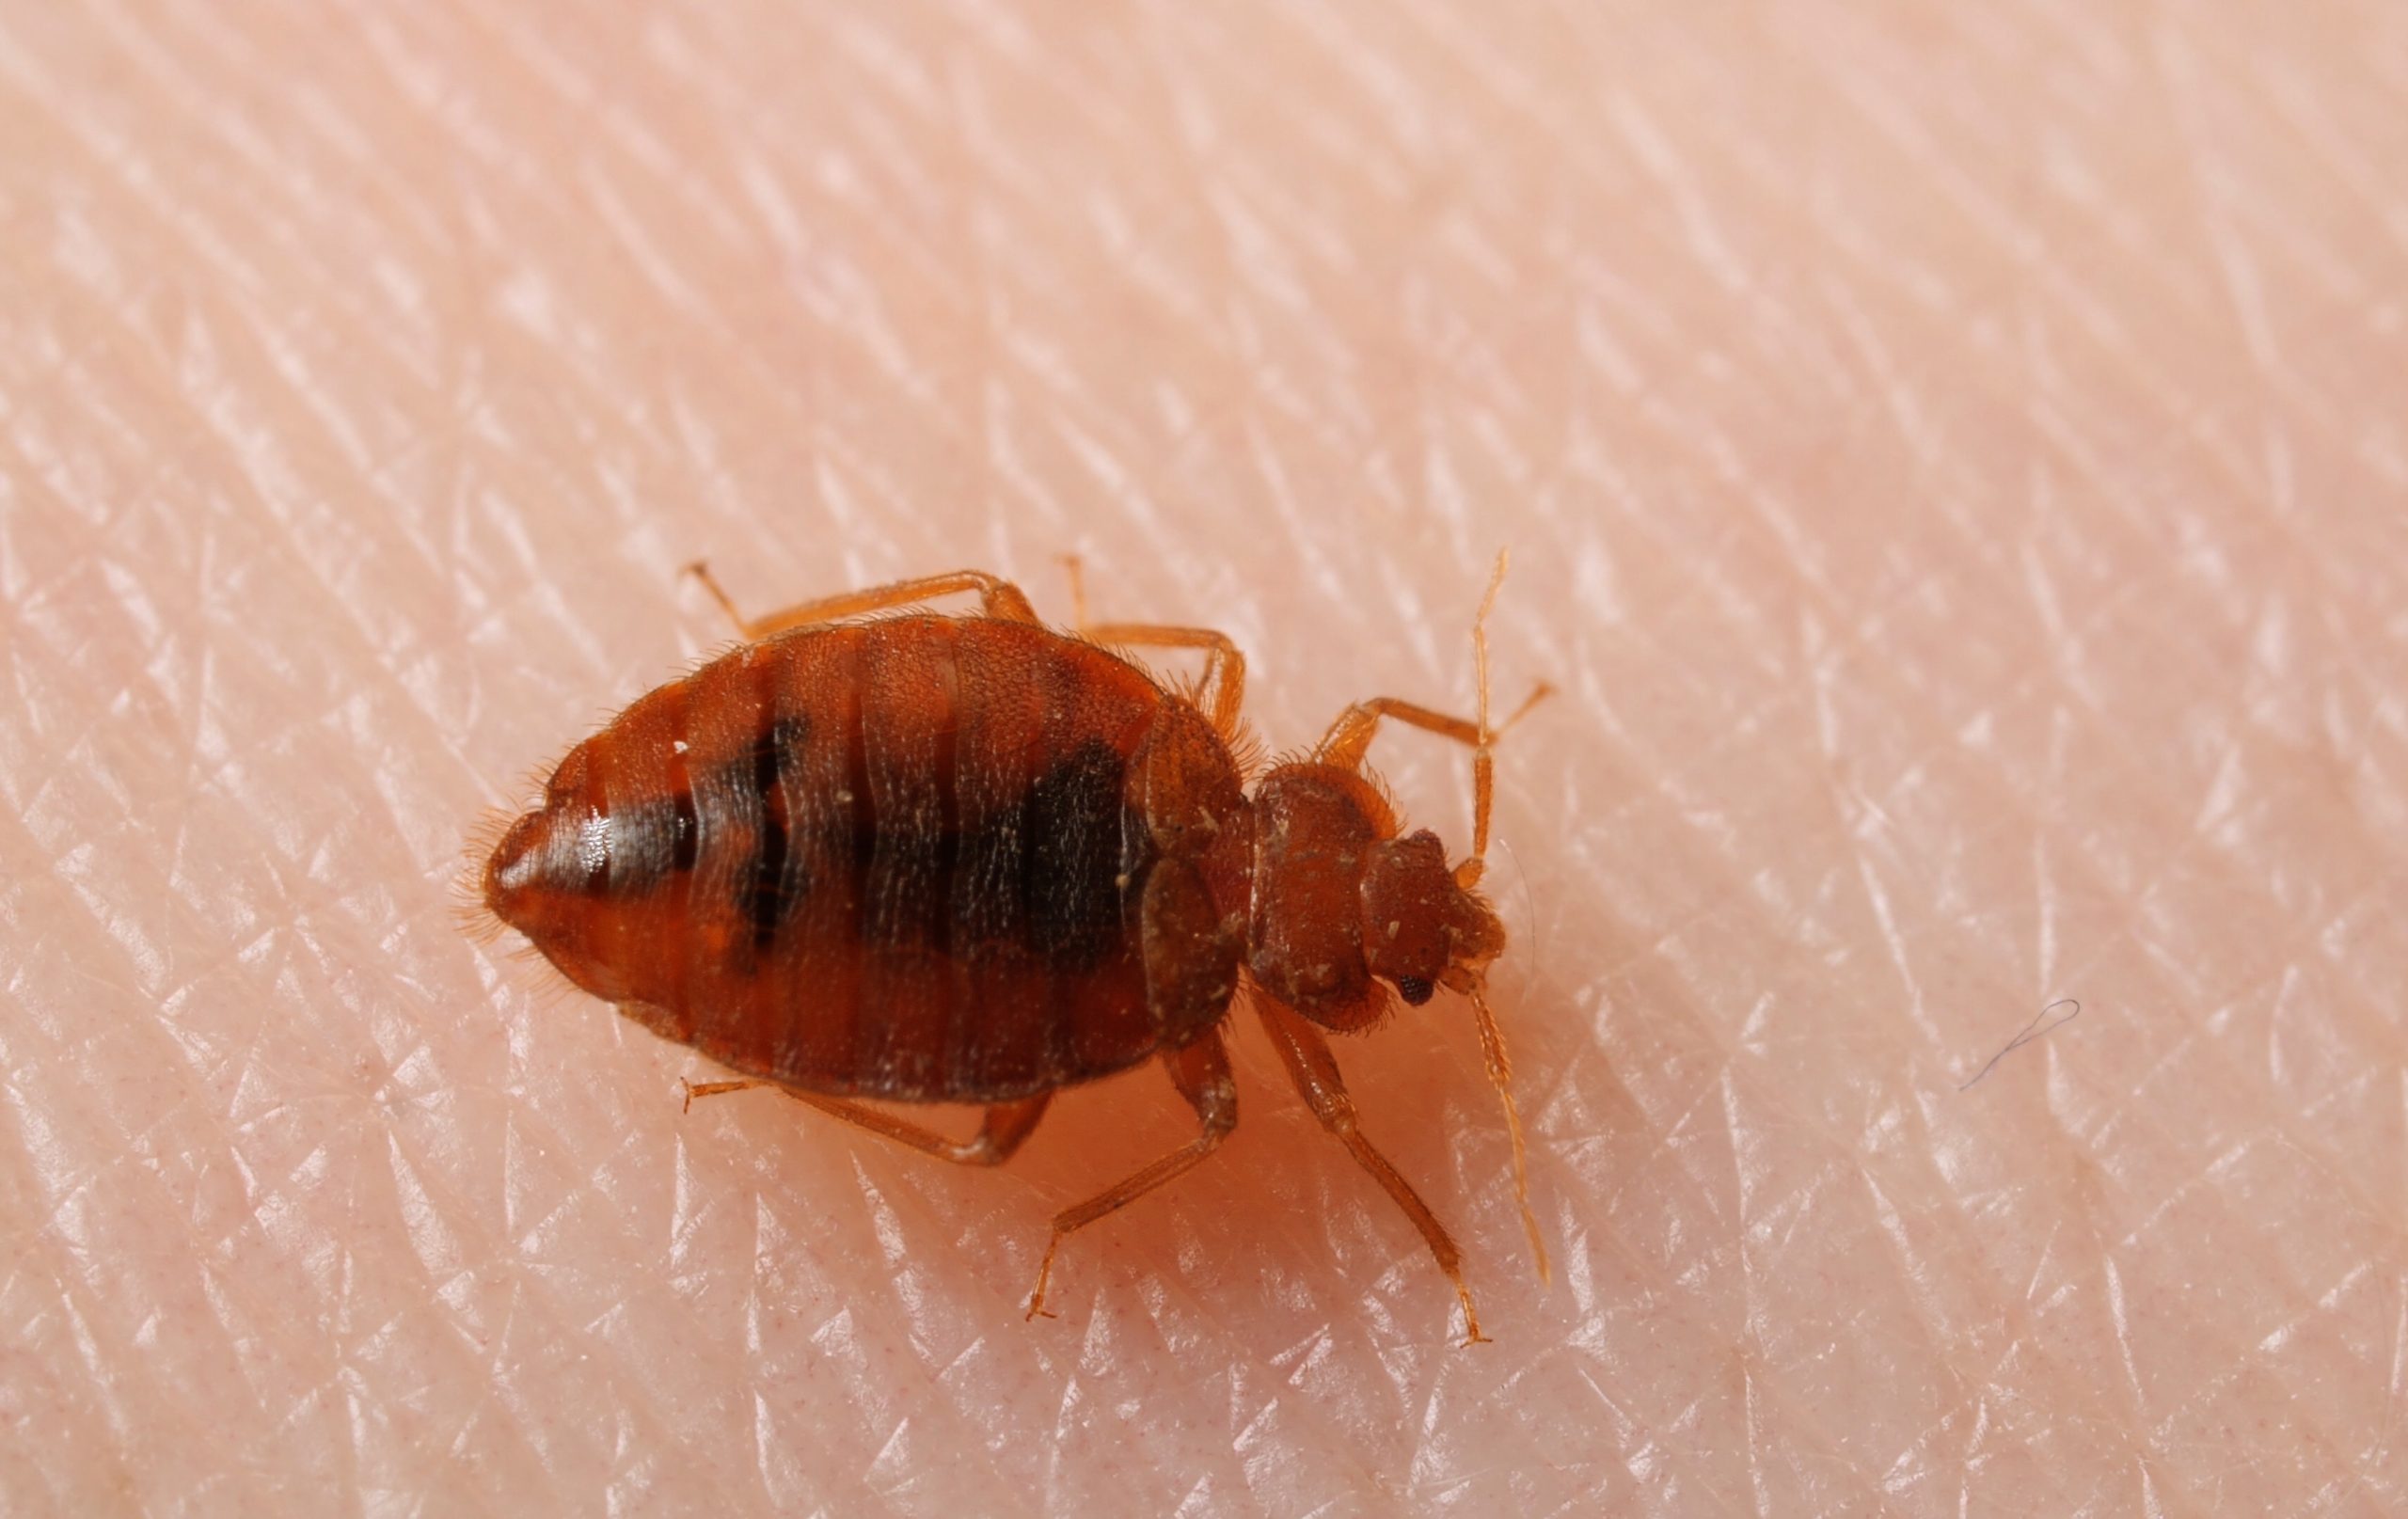 Do Bed Bugs Cause Blisters?